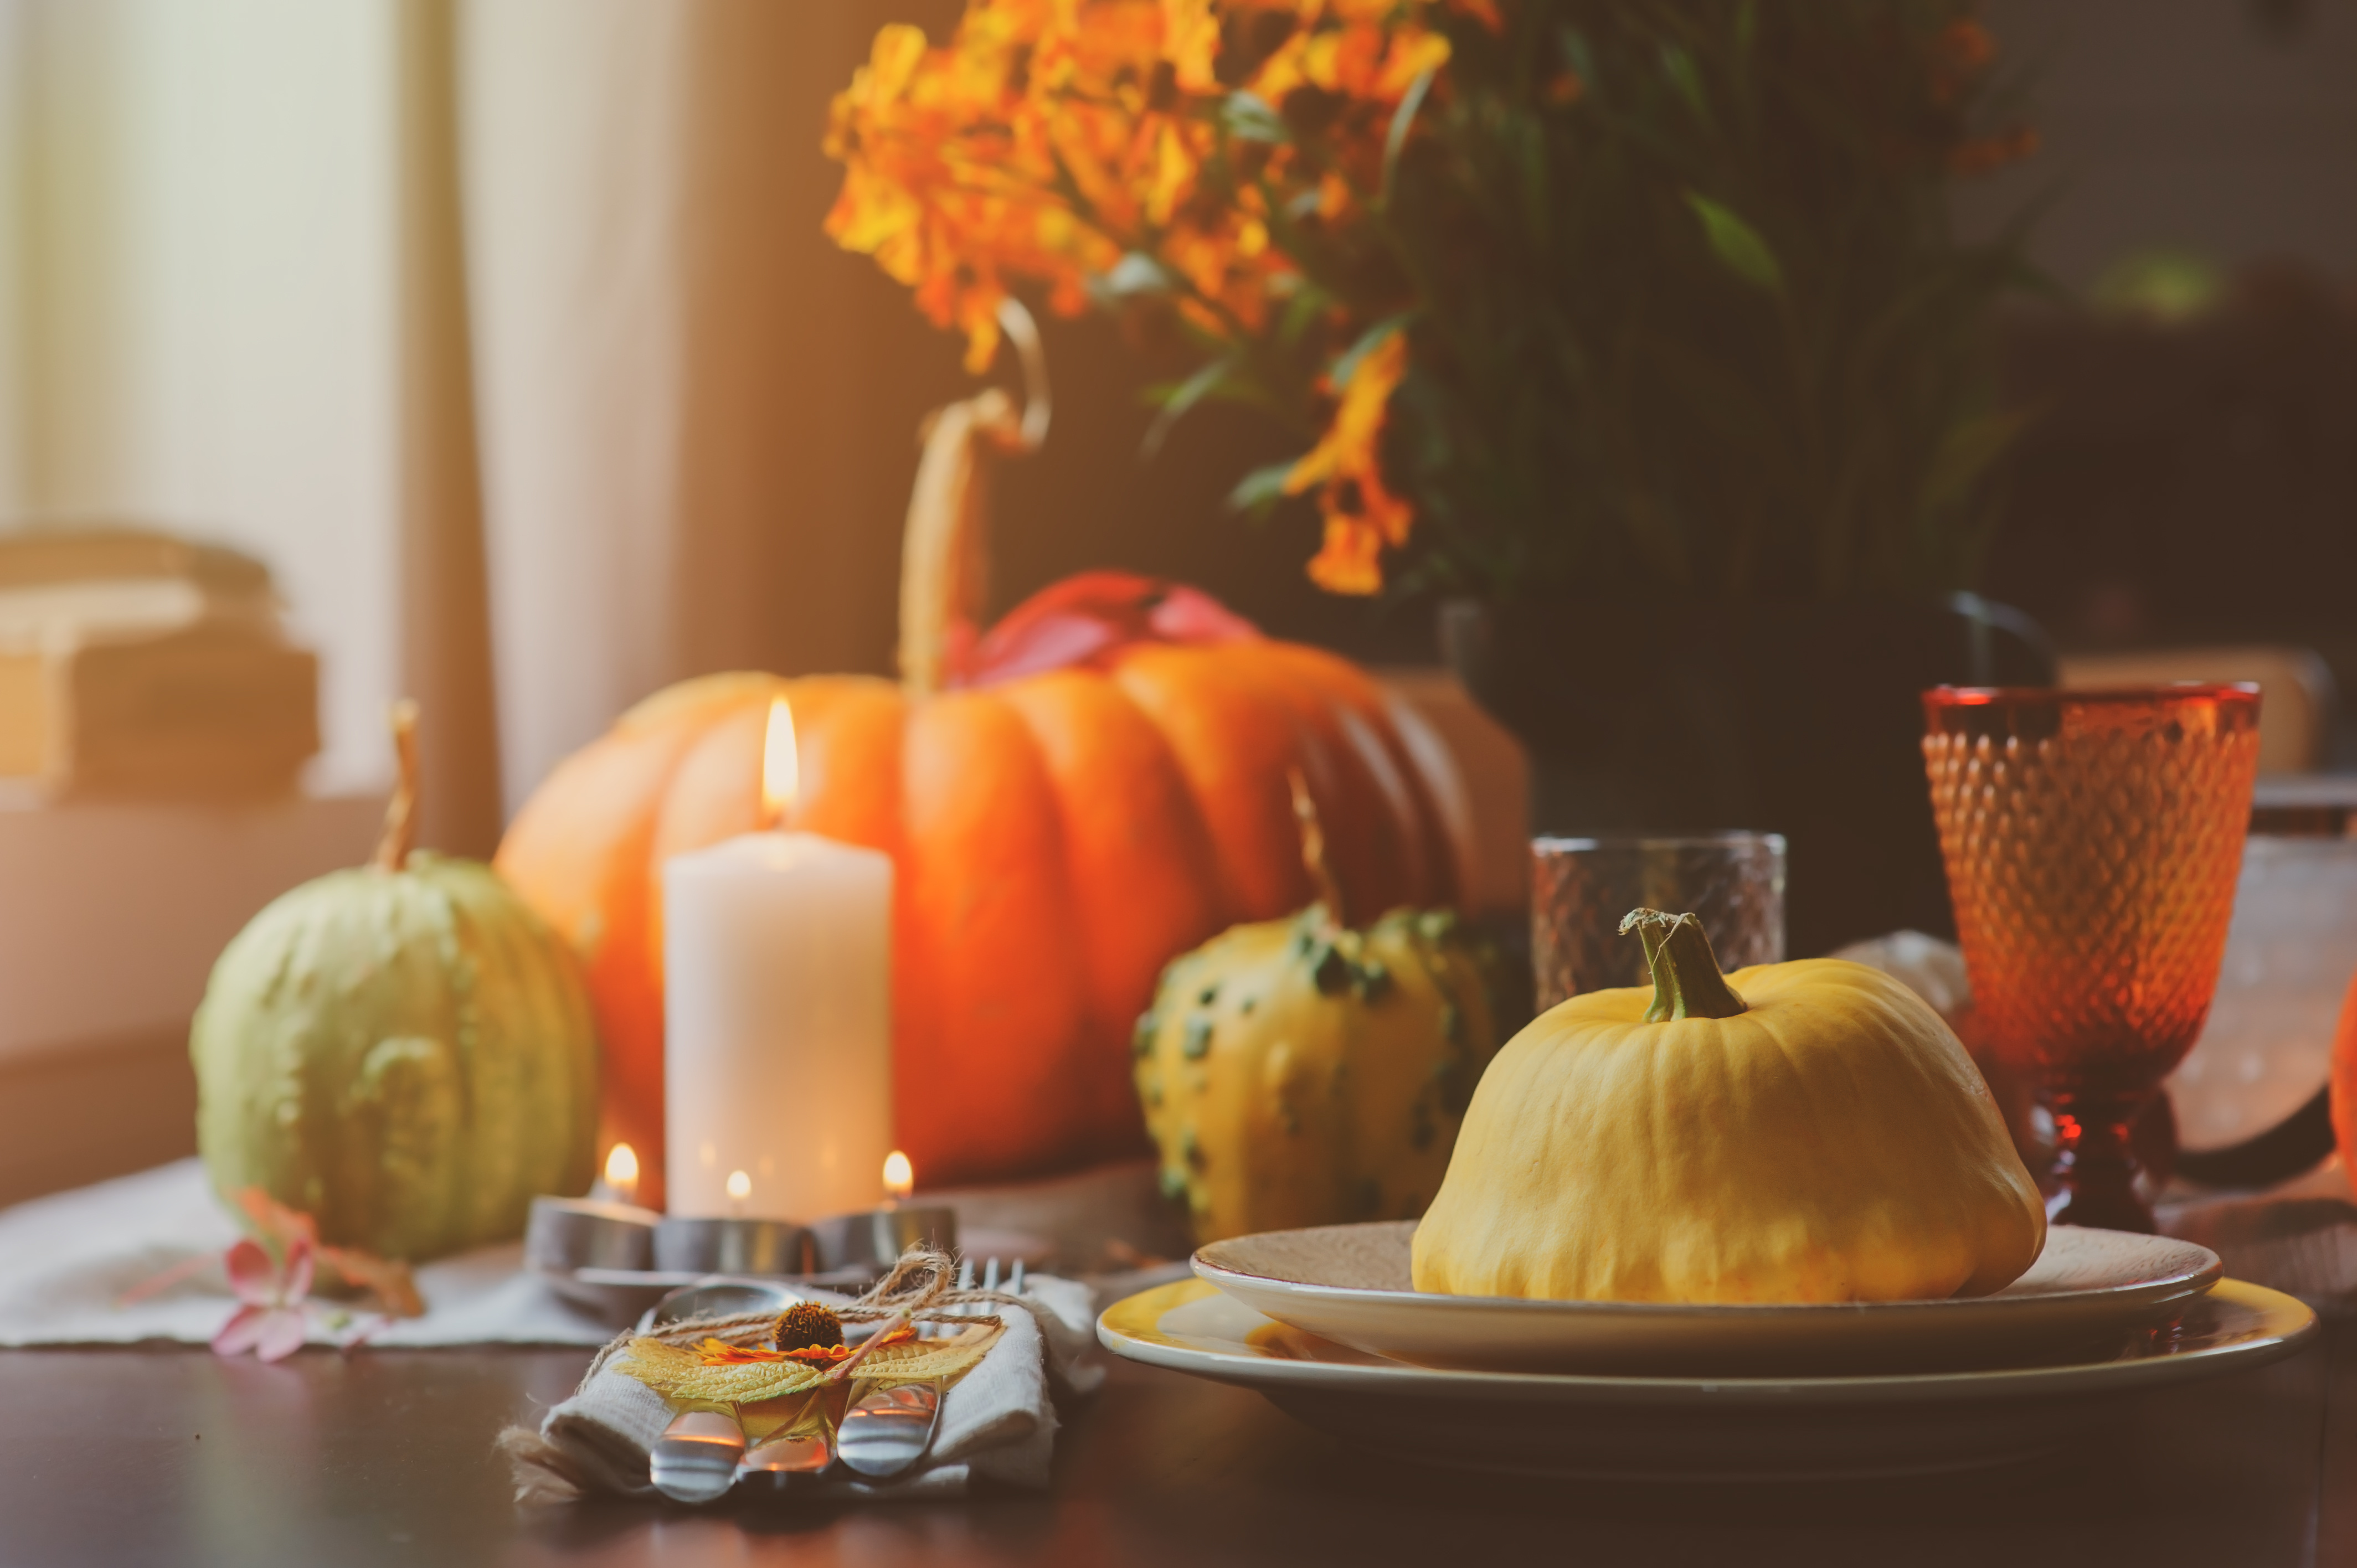 autumn traditional table setting for Thanksgiving or Halloween, with candles squash and pumpkins.